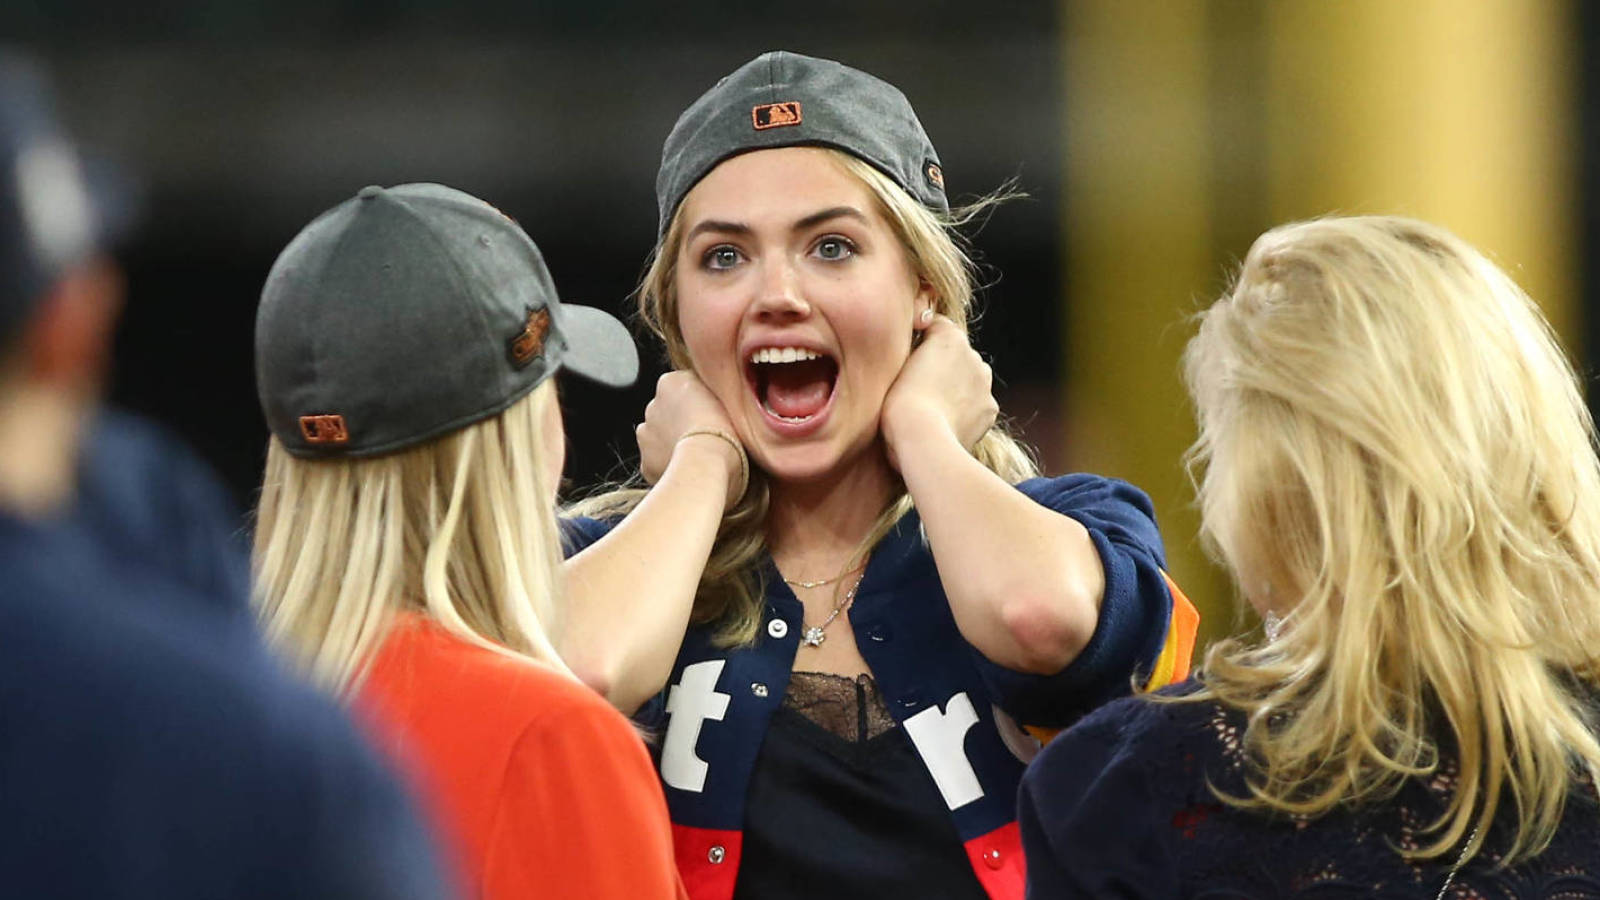 Kate Upton was so fired up after the Astros' big defensive play